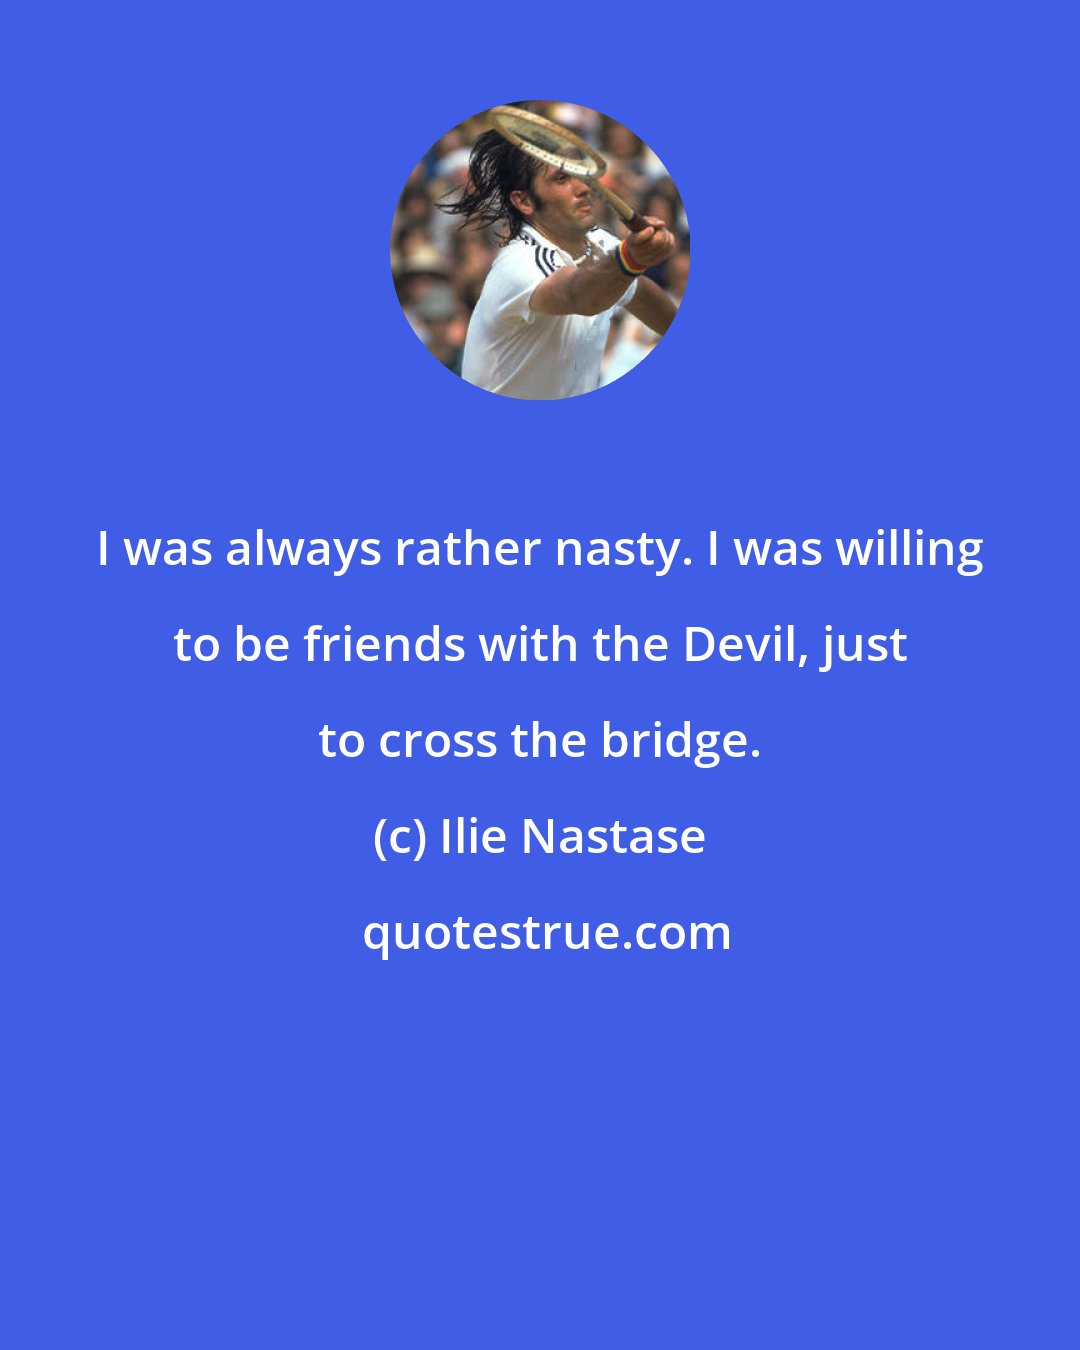 Ilie Nastase: I was always rather nasty. I was willing to be friends with the Devil, just to cross the bridge.